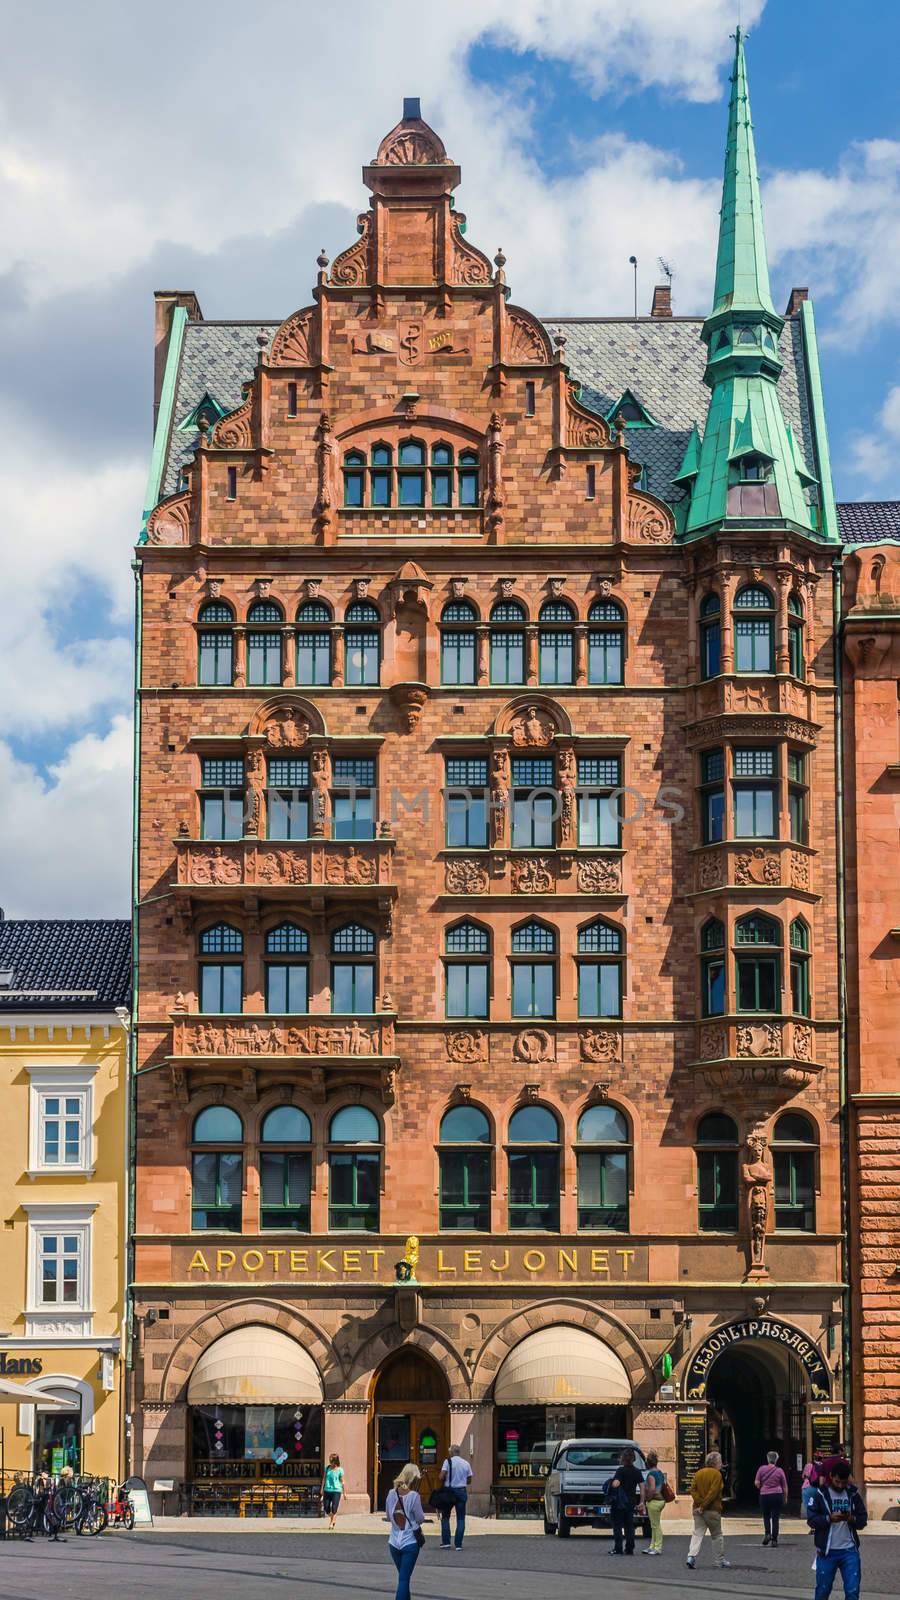 The city’s oldest pharmacy Apoteket Lejonet on the City Hall Square in Malmo, well-known for its vintage Art Noveau interior with carved wooden shelves and glass-plated ceiling